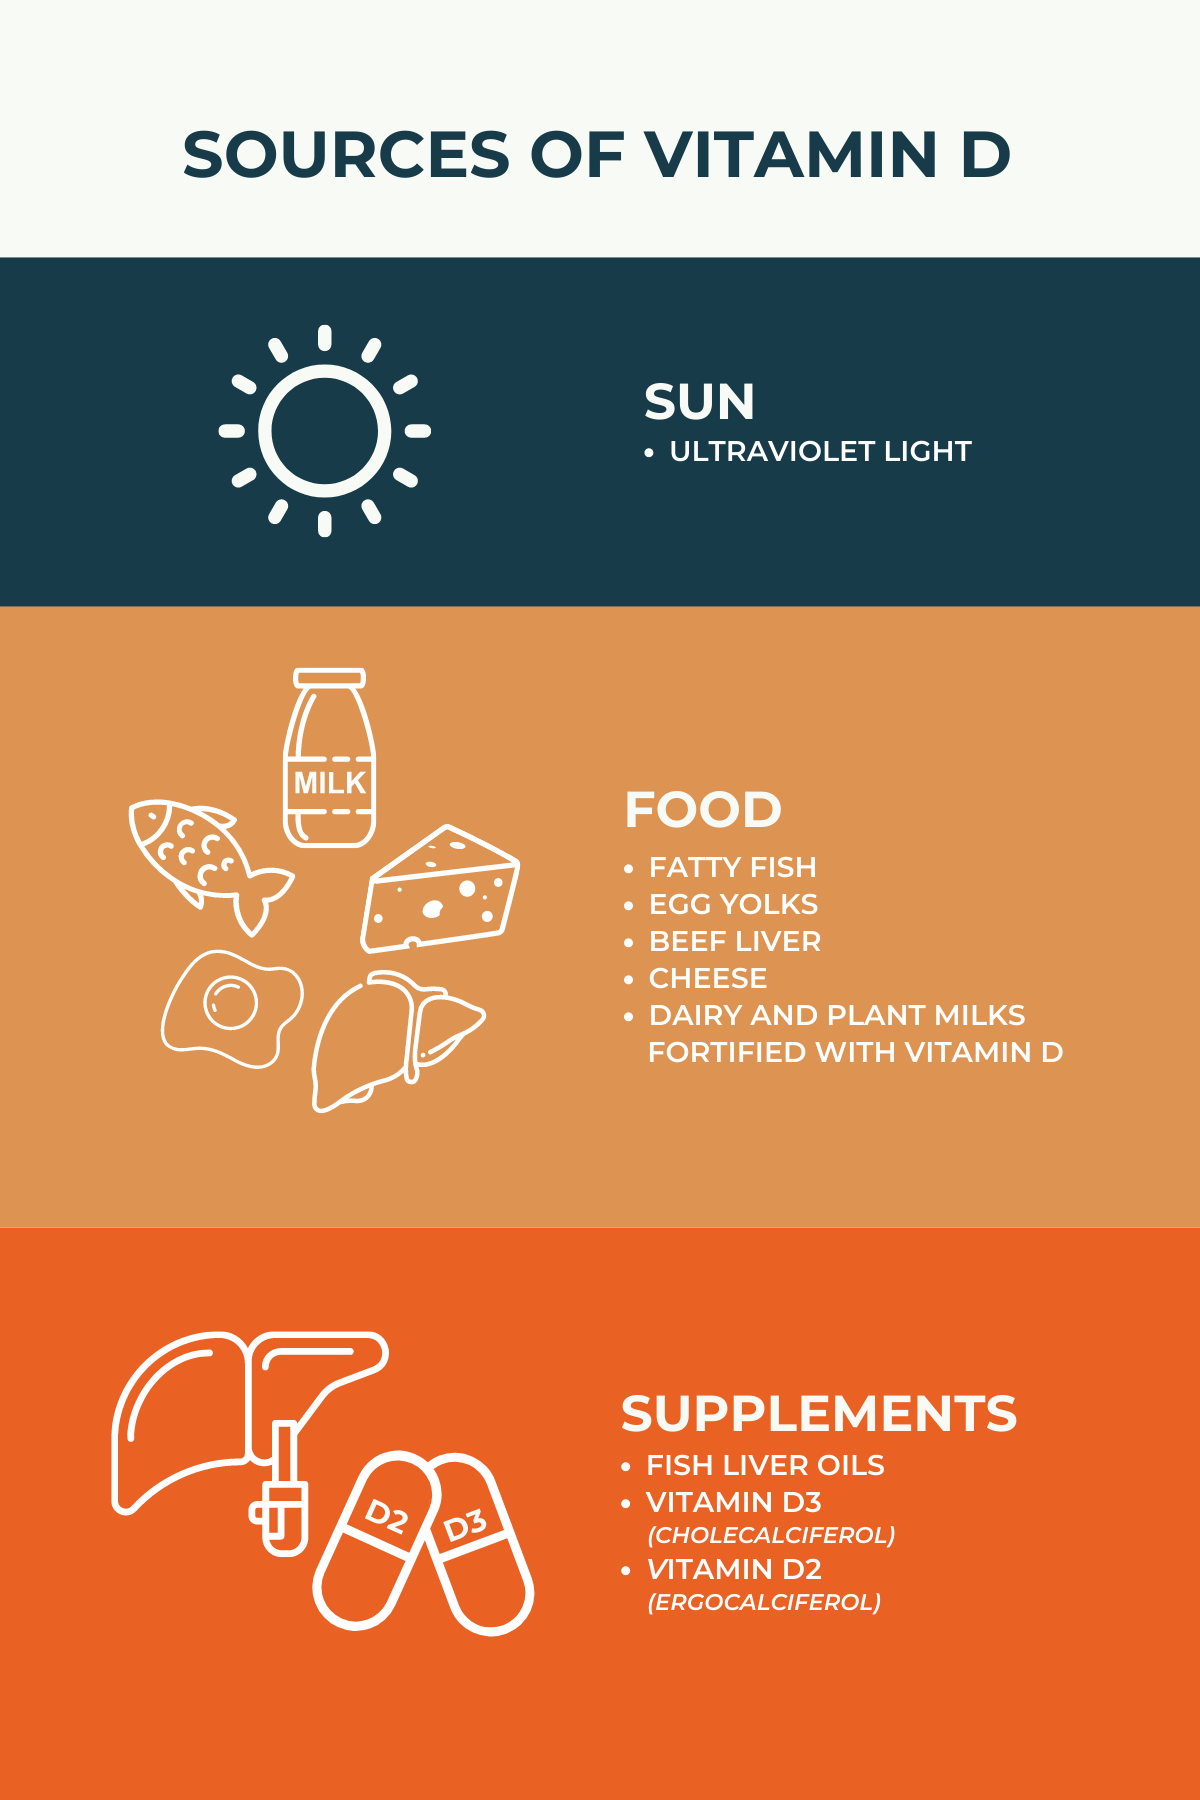 vitamin D and MS | Multiple Sclerosis News Today | infographic depicting sources of vitamin D